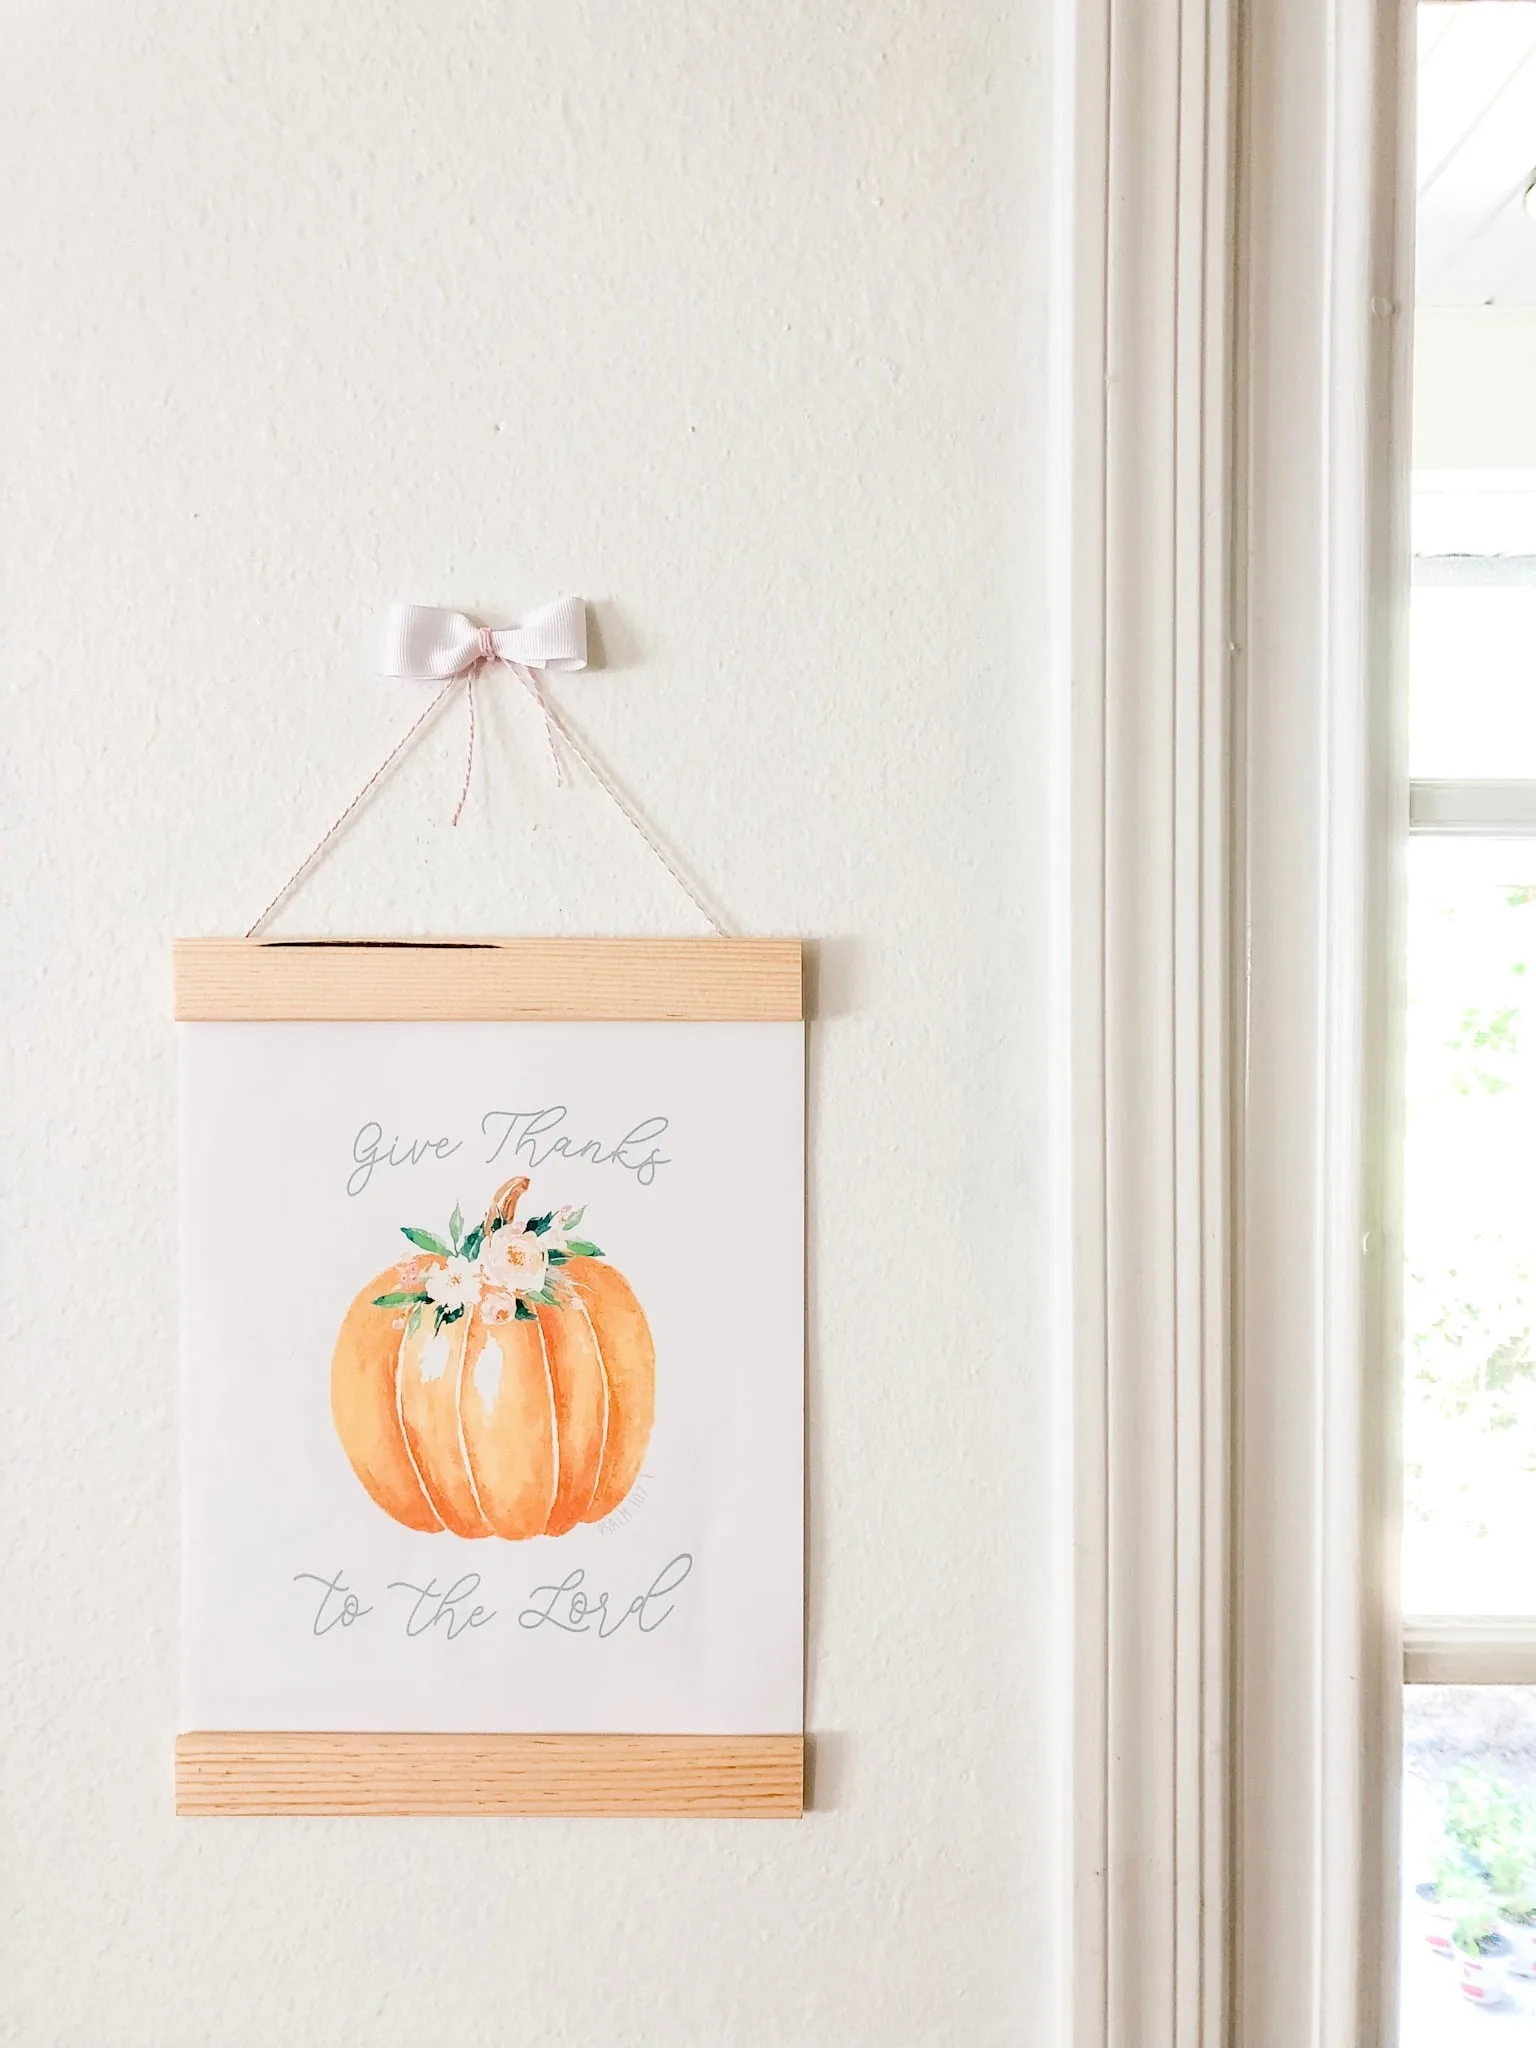 Free fall printables Give Thanks to the Lord floral pumpkin. This autumn printable is easy to printout and hang in your home for inspiration for the harvest season.